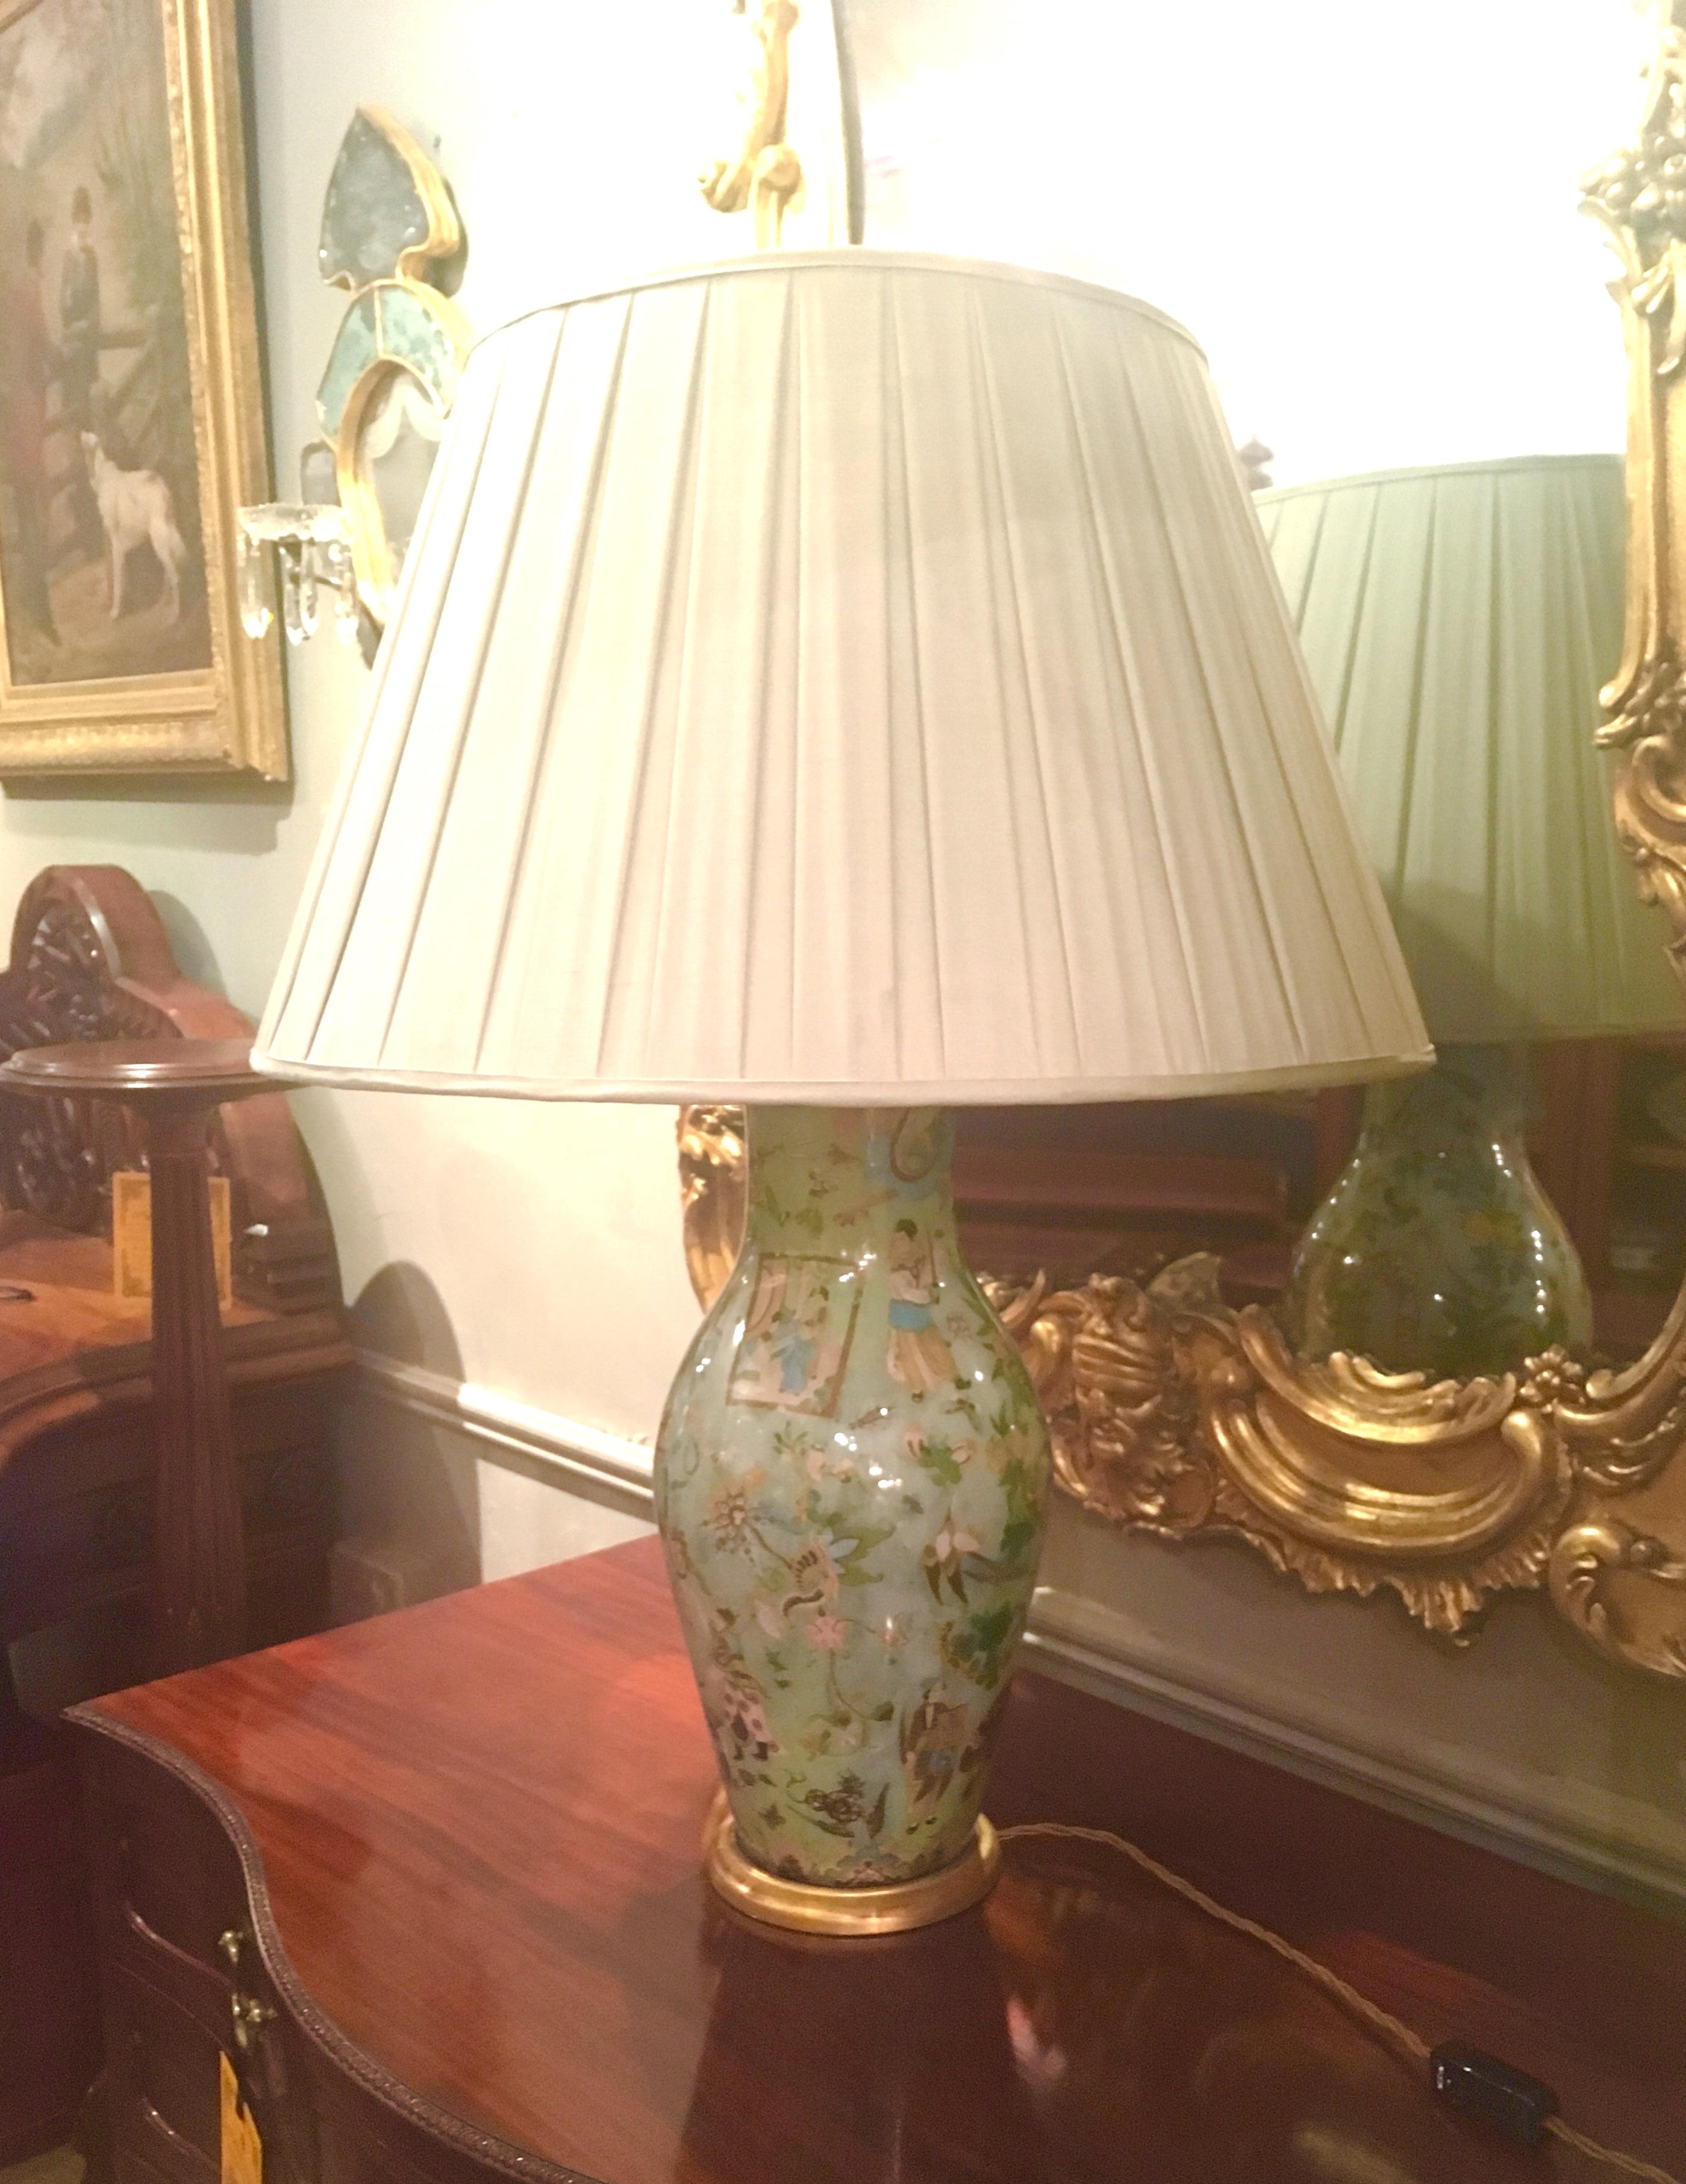 Chinese Export Early 20th Century Decalcomania Vase Lamp For Sale